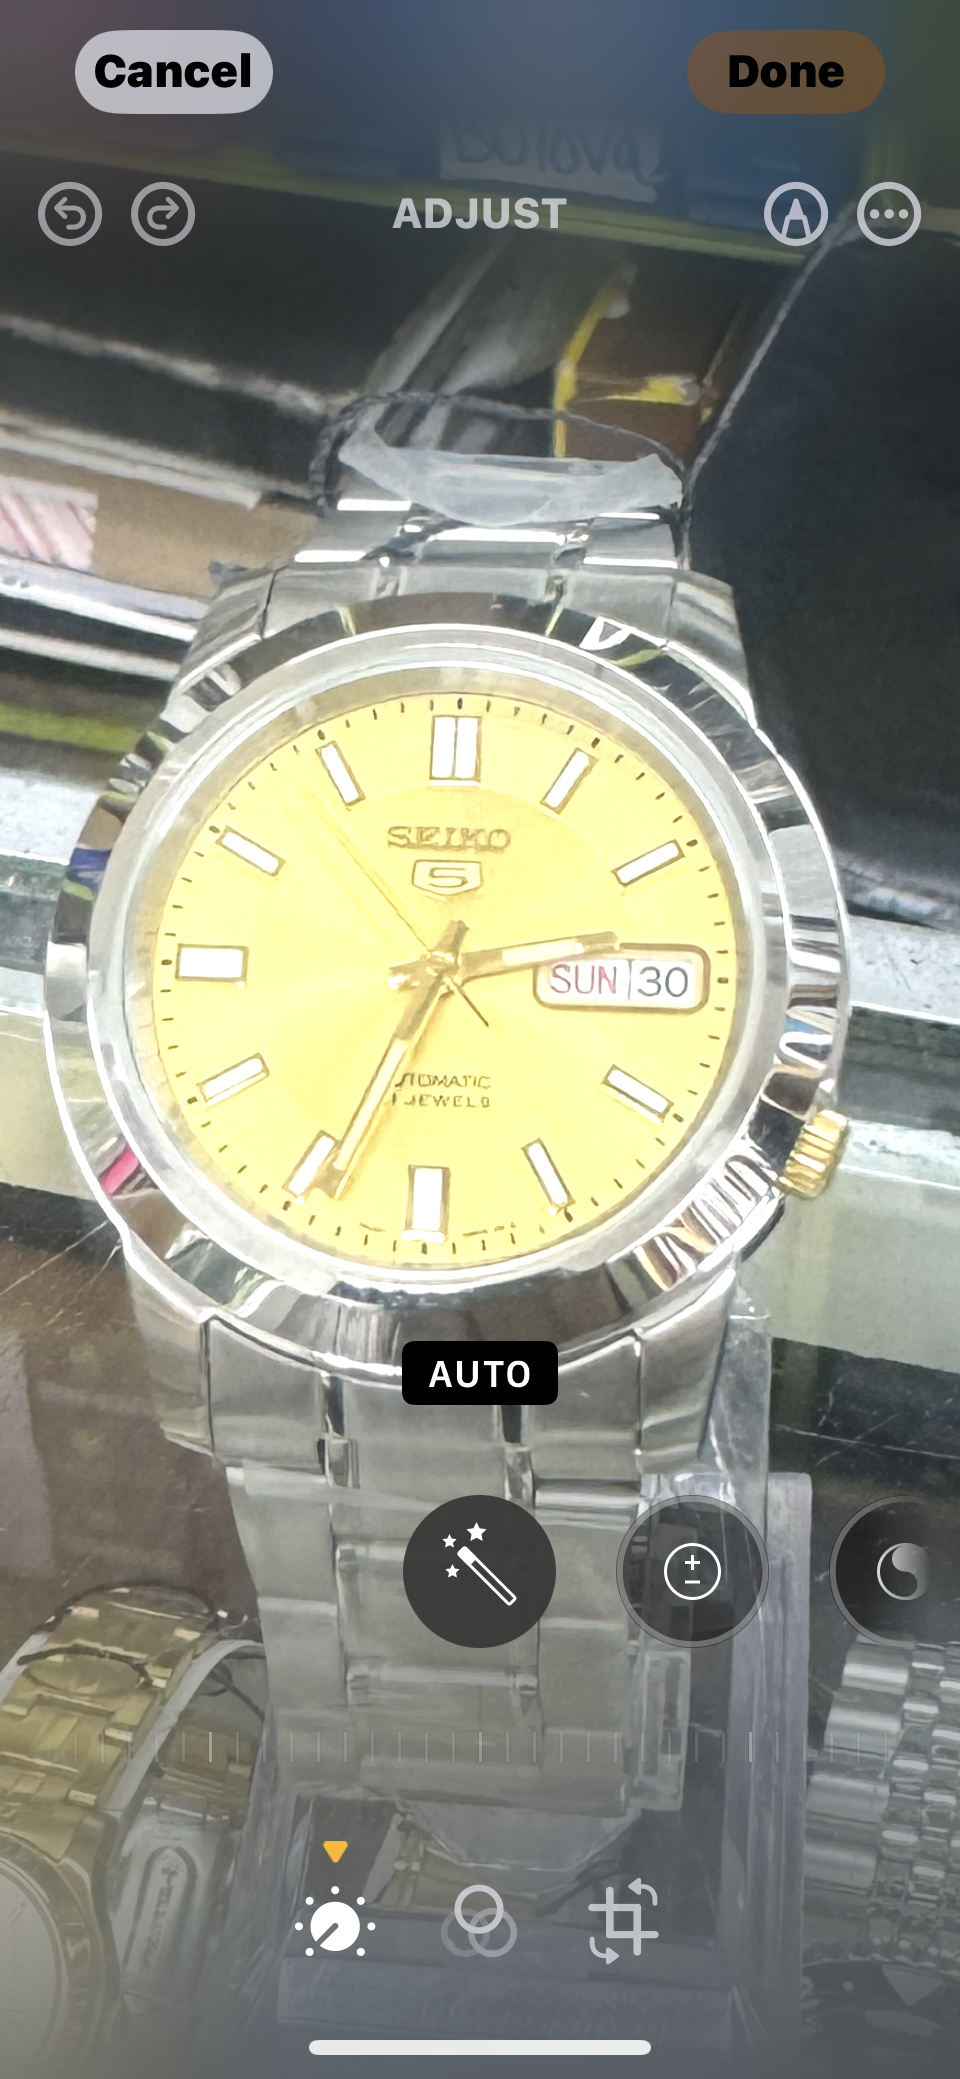 Seiko Automatic Movement for Men Watch  Goldtone / Yellow and Gray Color  See through back crystal glass   Size : 40mm Diameter Men Wrist Size  Stainless Steel Material   Brand New Item with Tag  Box is color black regular black box  self-winding,” automa